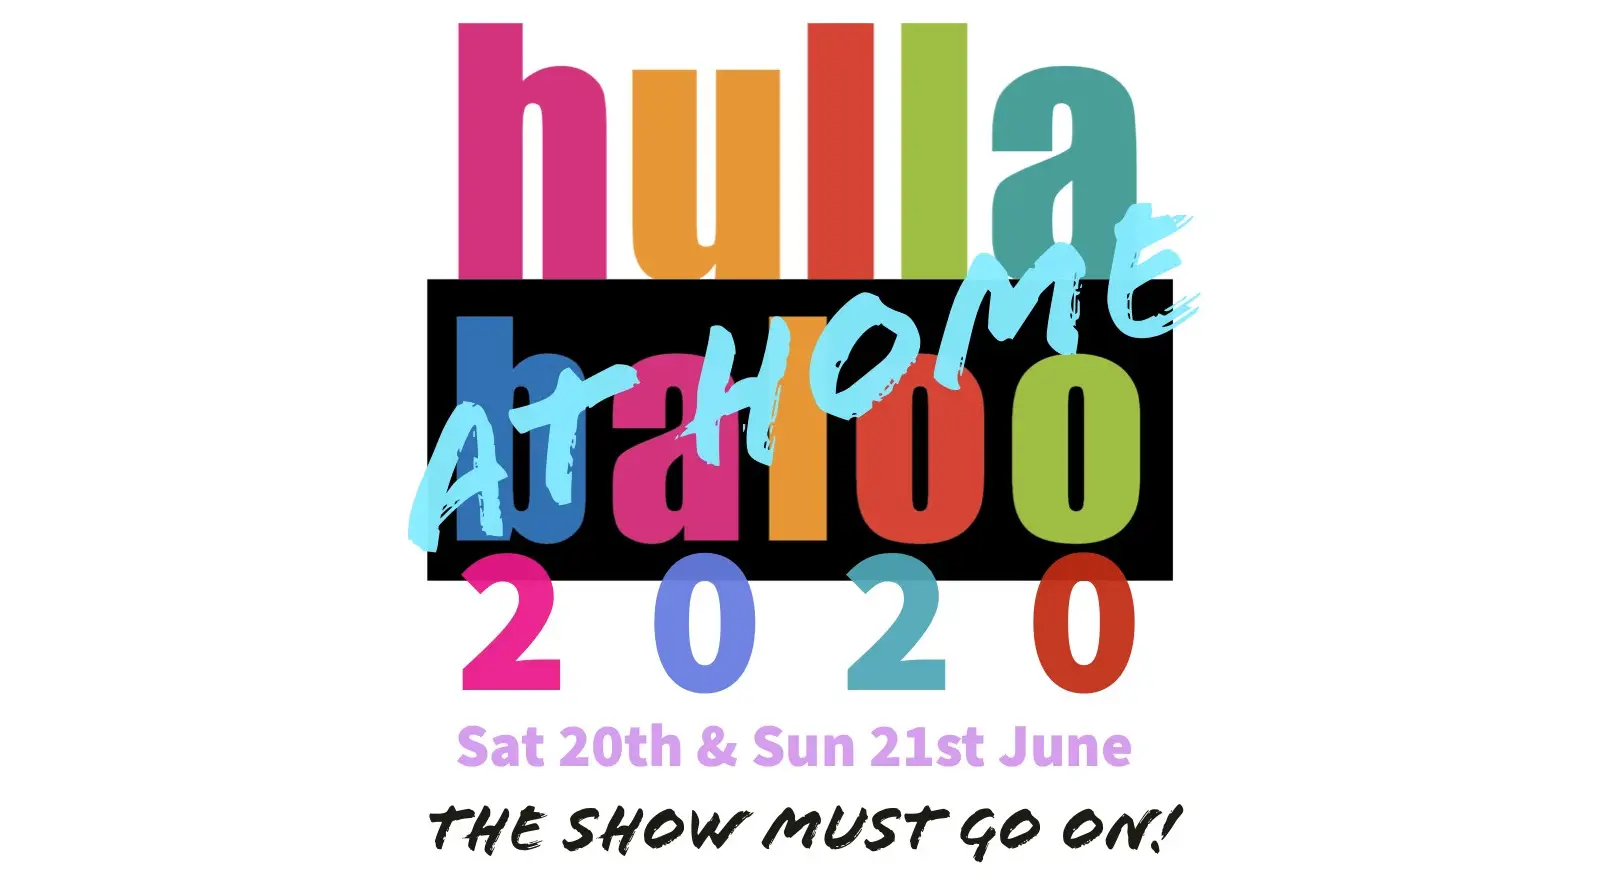 Hullabaloo... At Home... The Show's Going On!